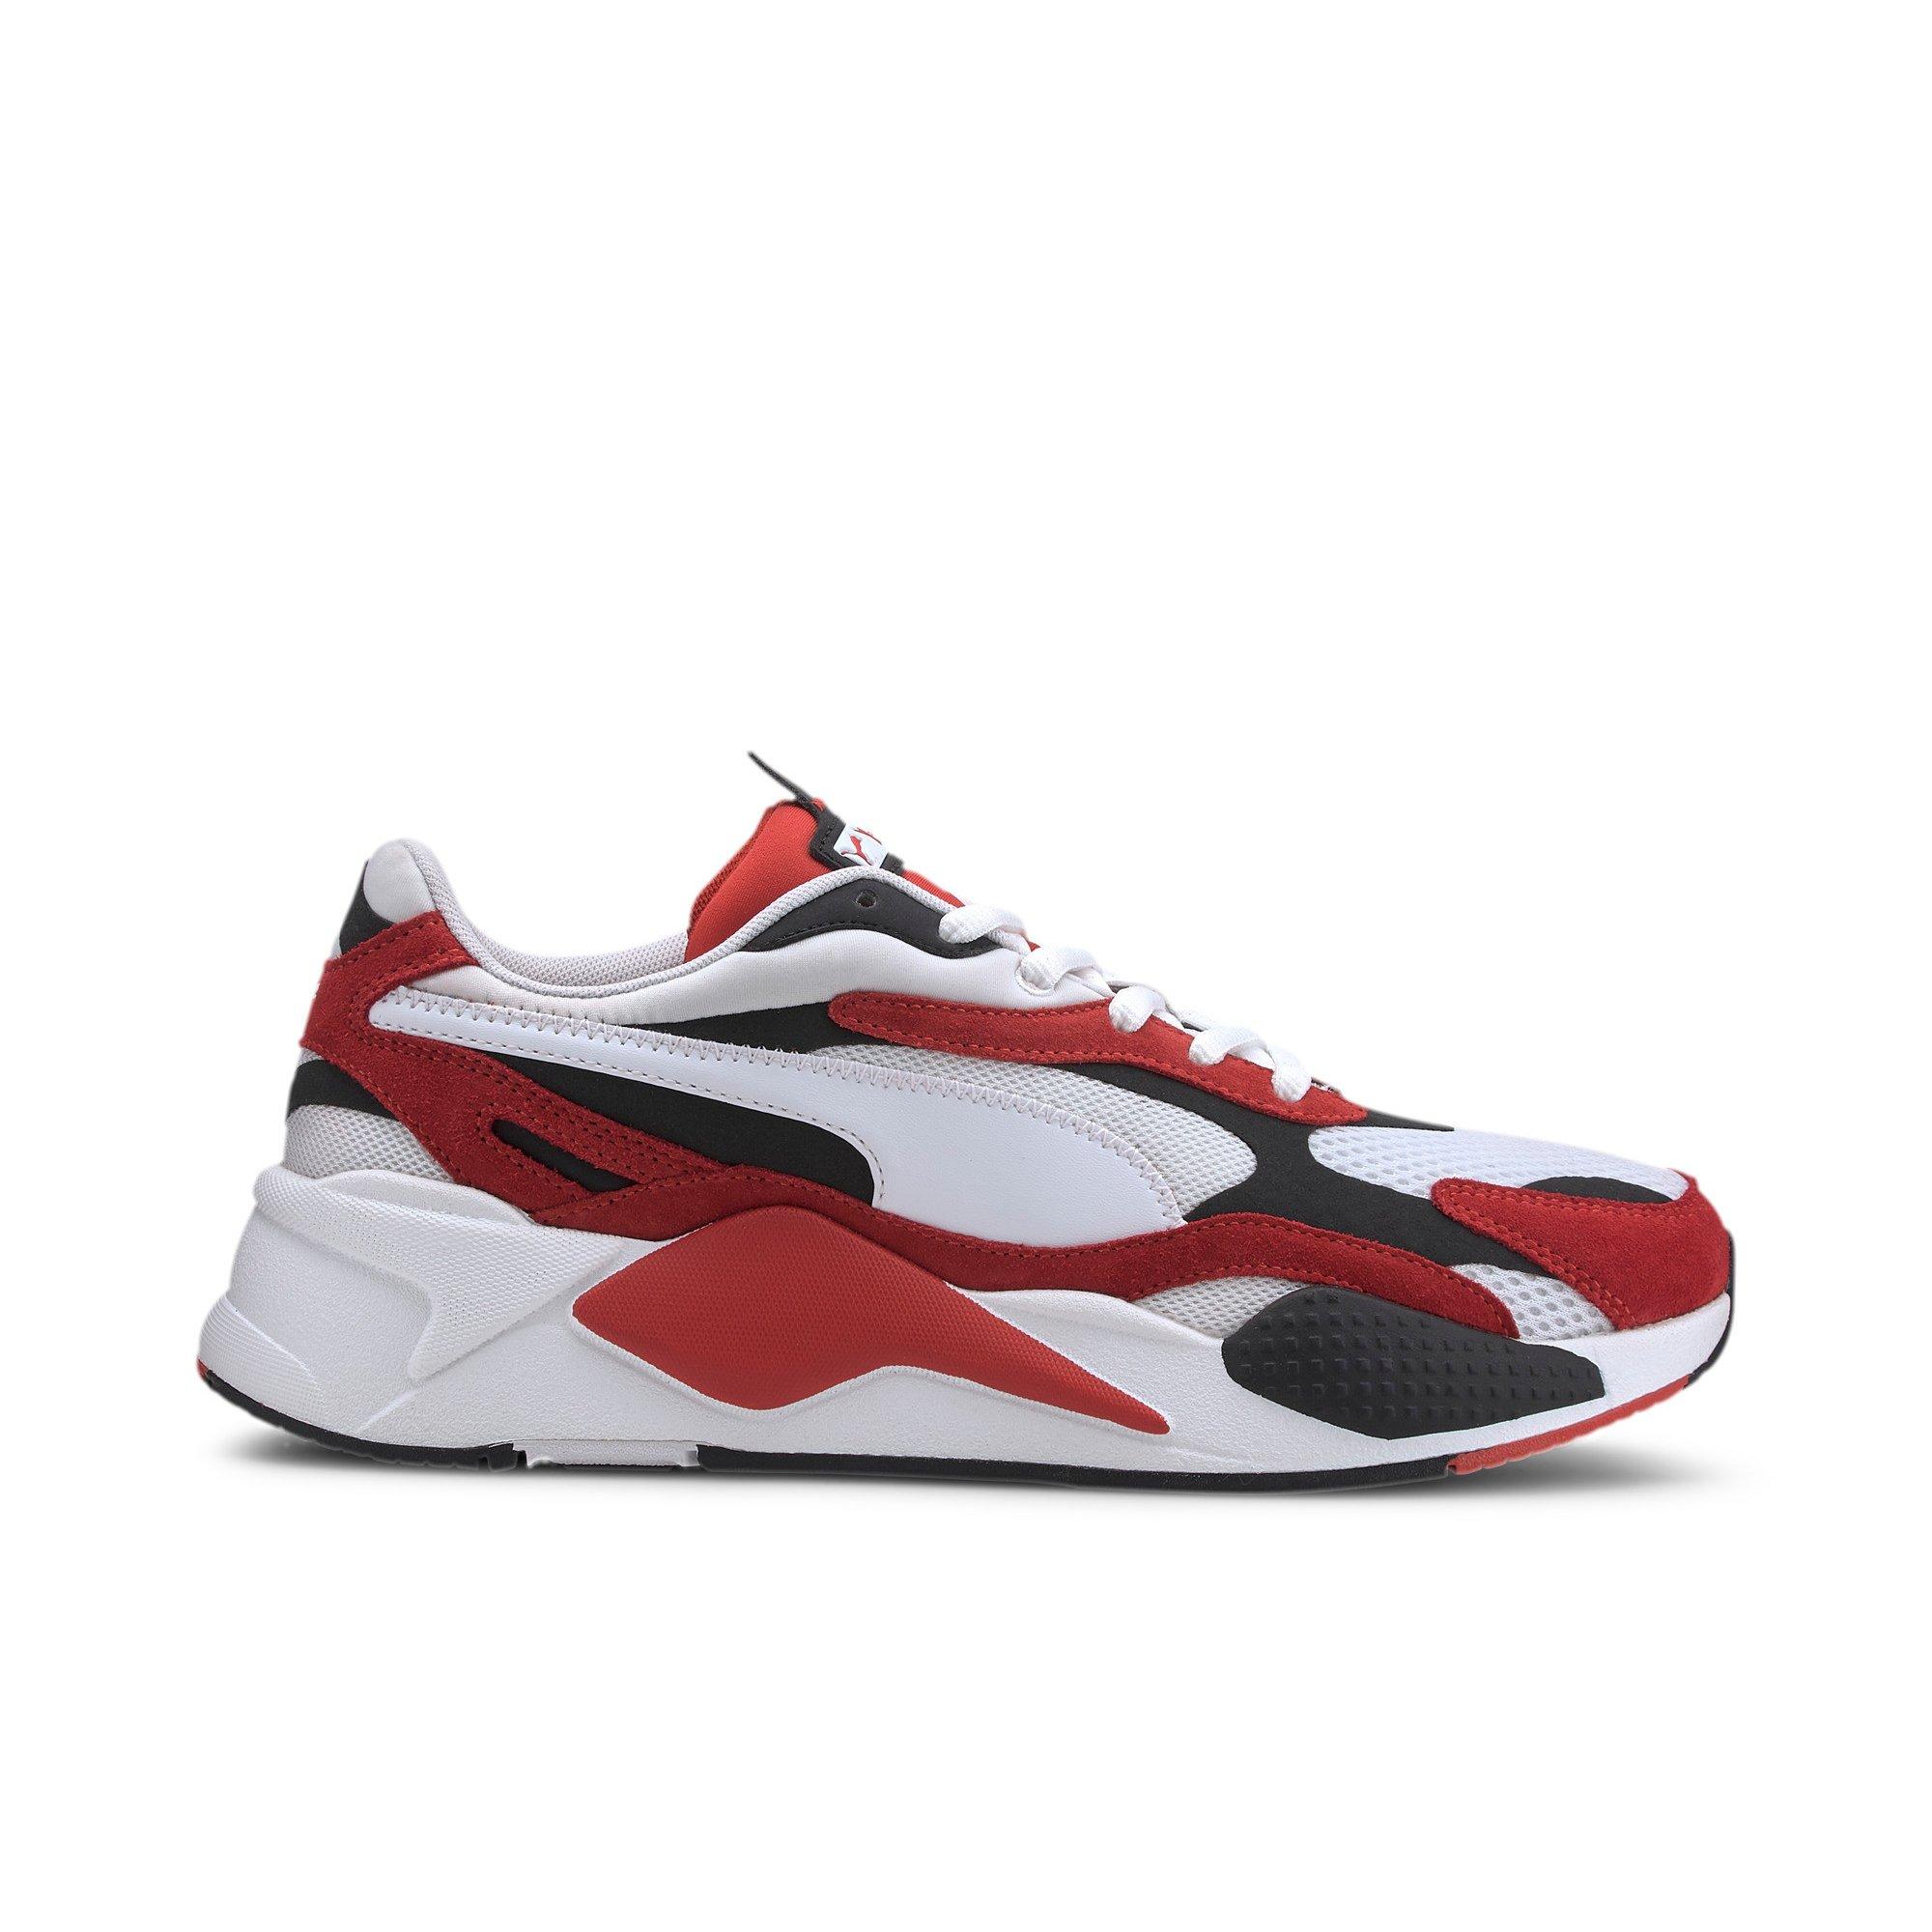 puma rsx black and red